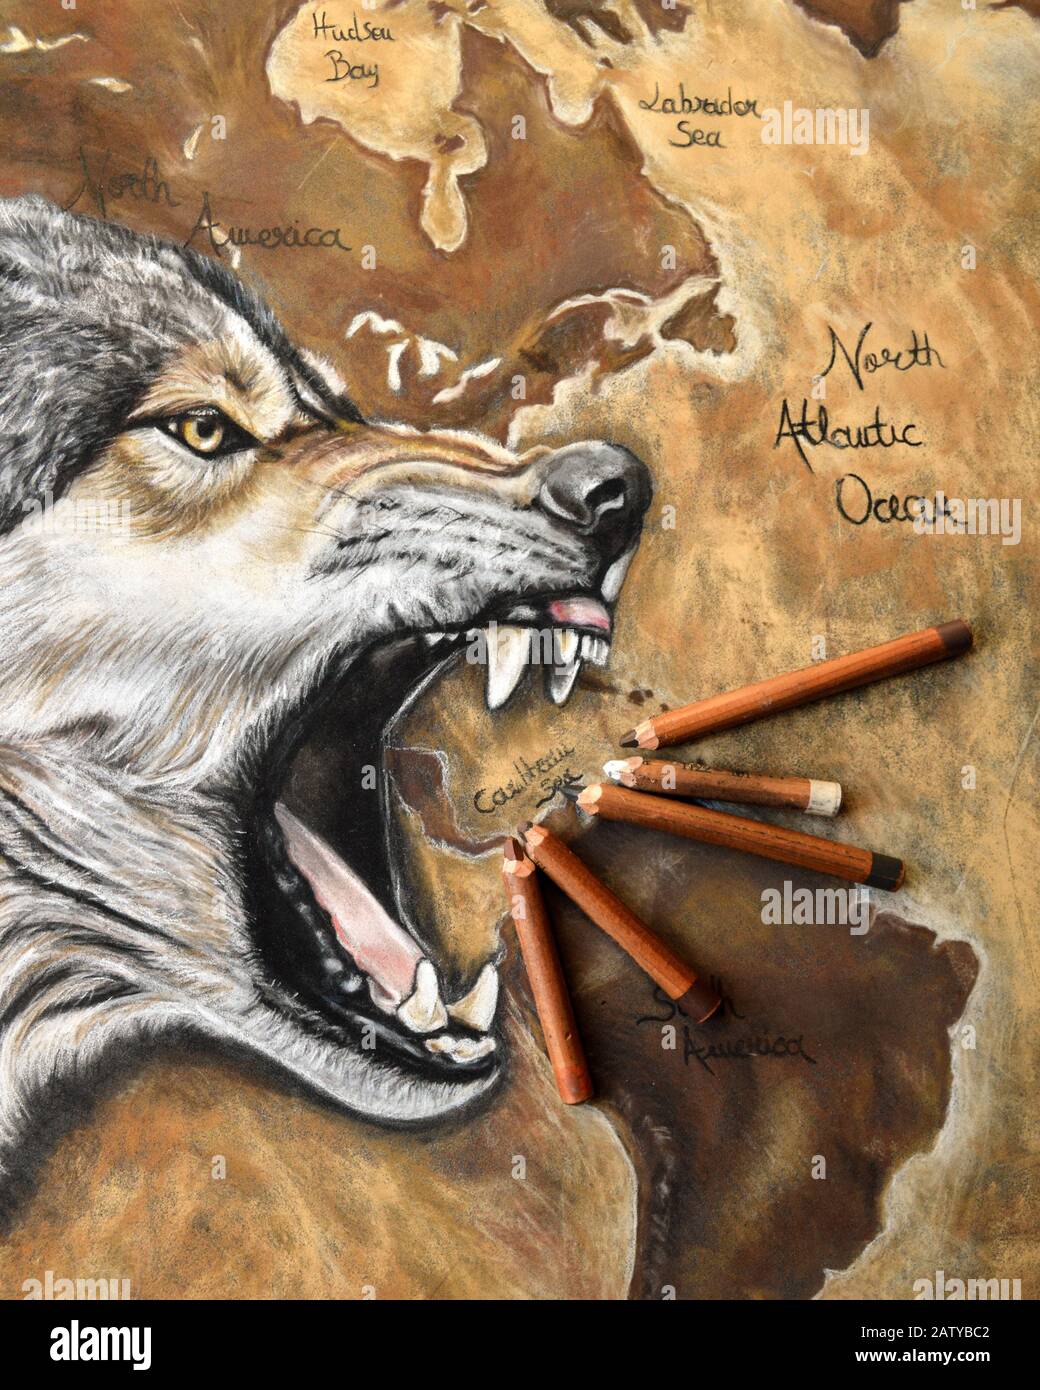 Magnificent animal art painting with an aggressive wolf Stock Photo